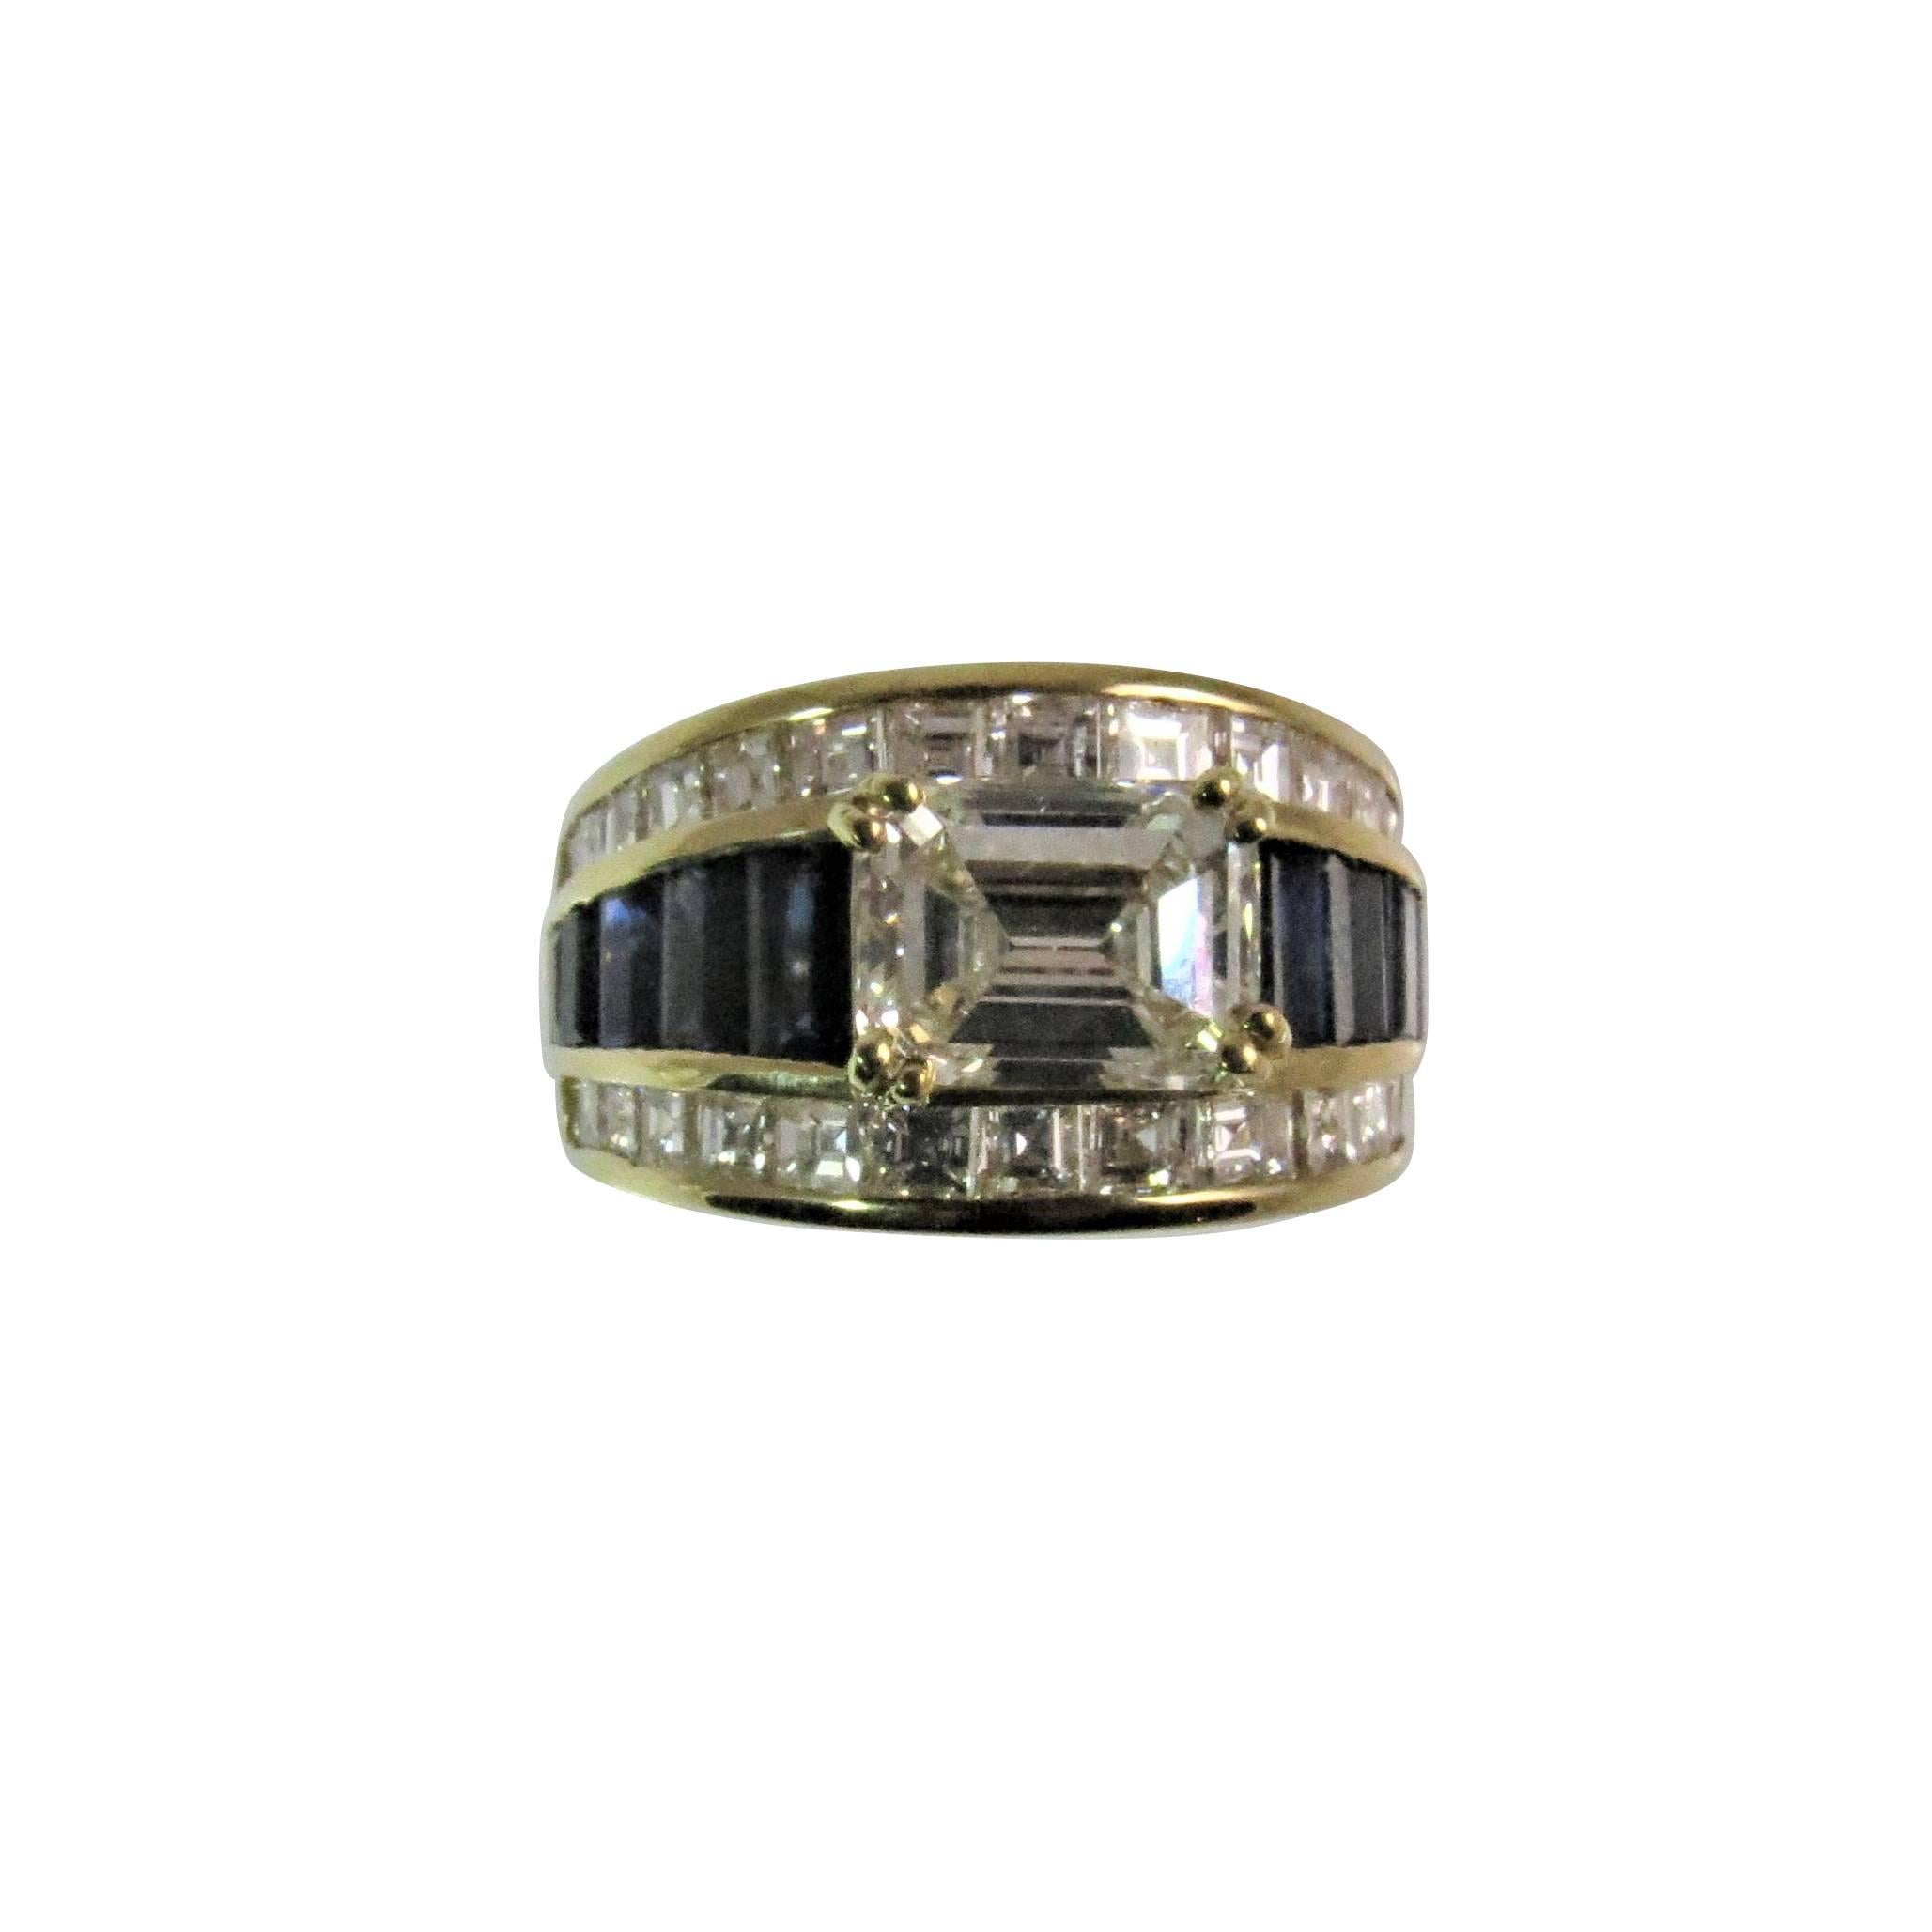 18K Yellow Gold Ring With 1.87ct Emerald Cut Diamond and Diamonds and Sapphires